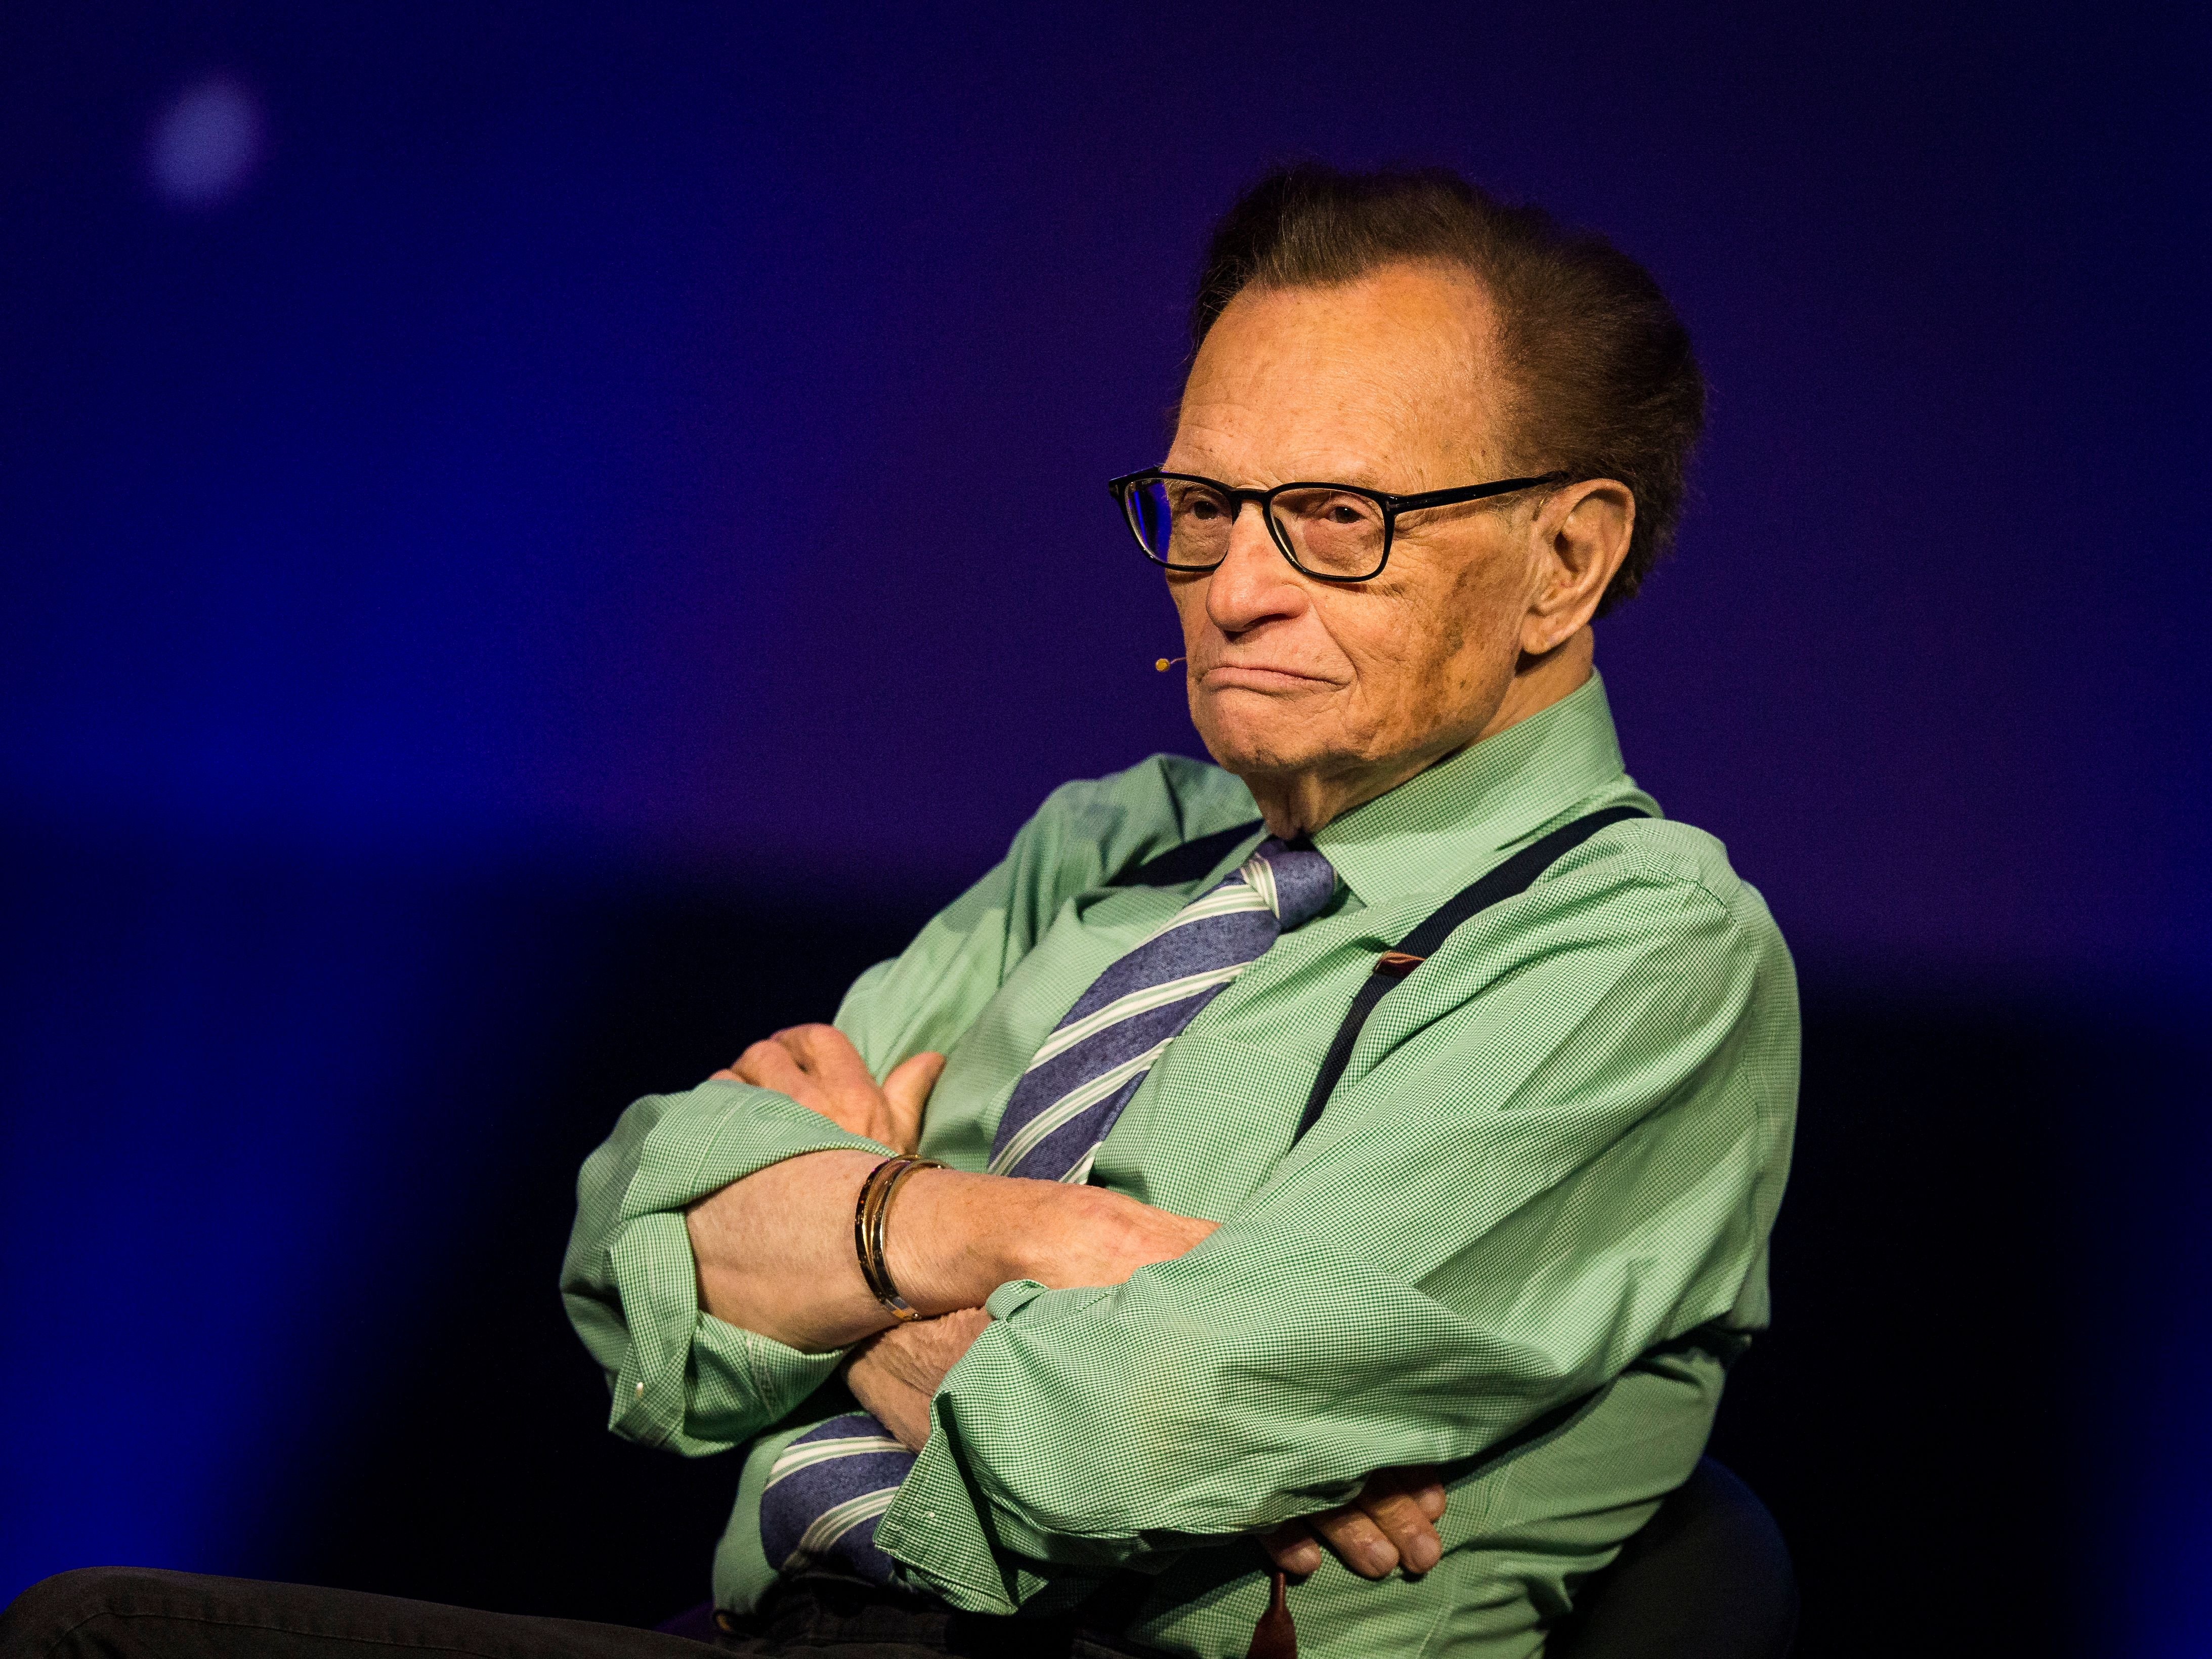 87-year-old television and radio host Larry King attending the Starmus Festival Trondheim, Norway | Photo: Getty Images